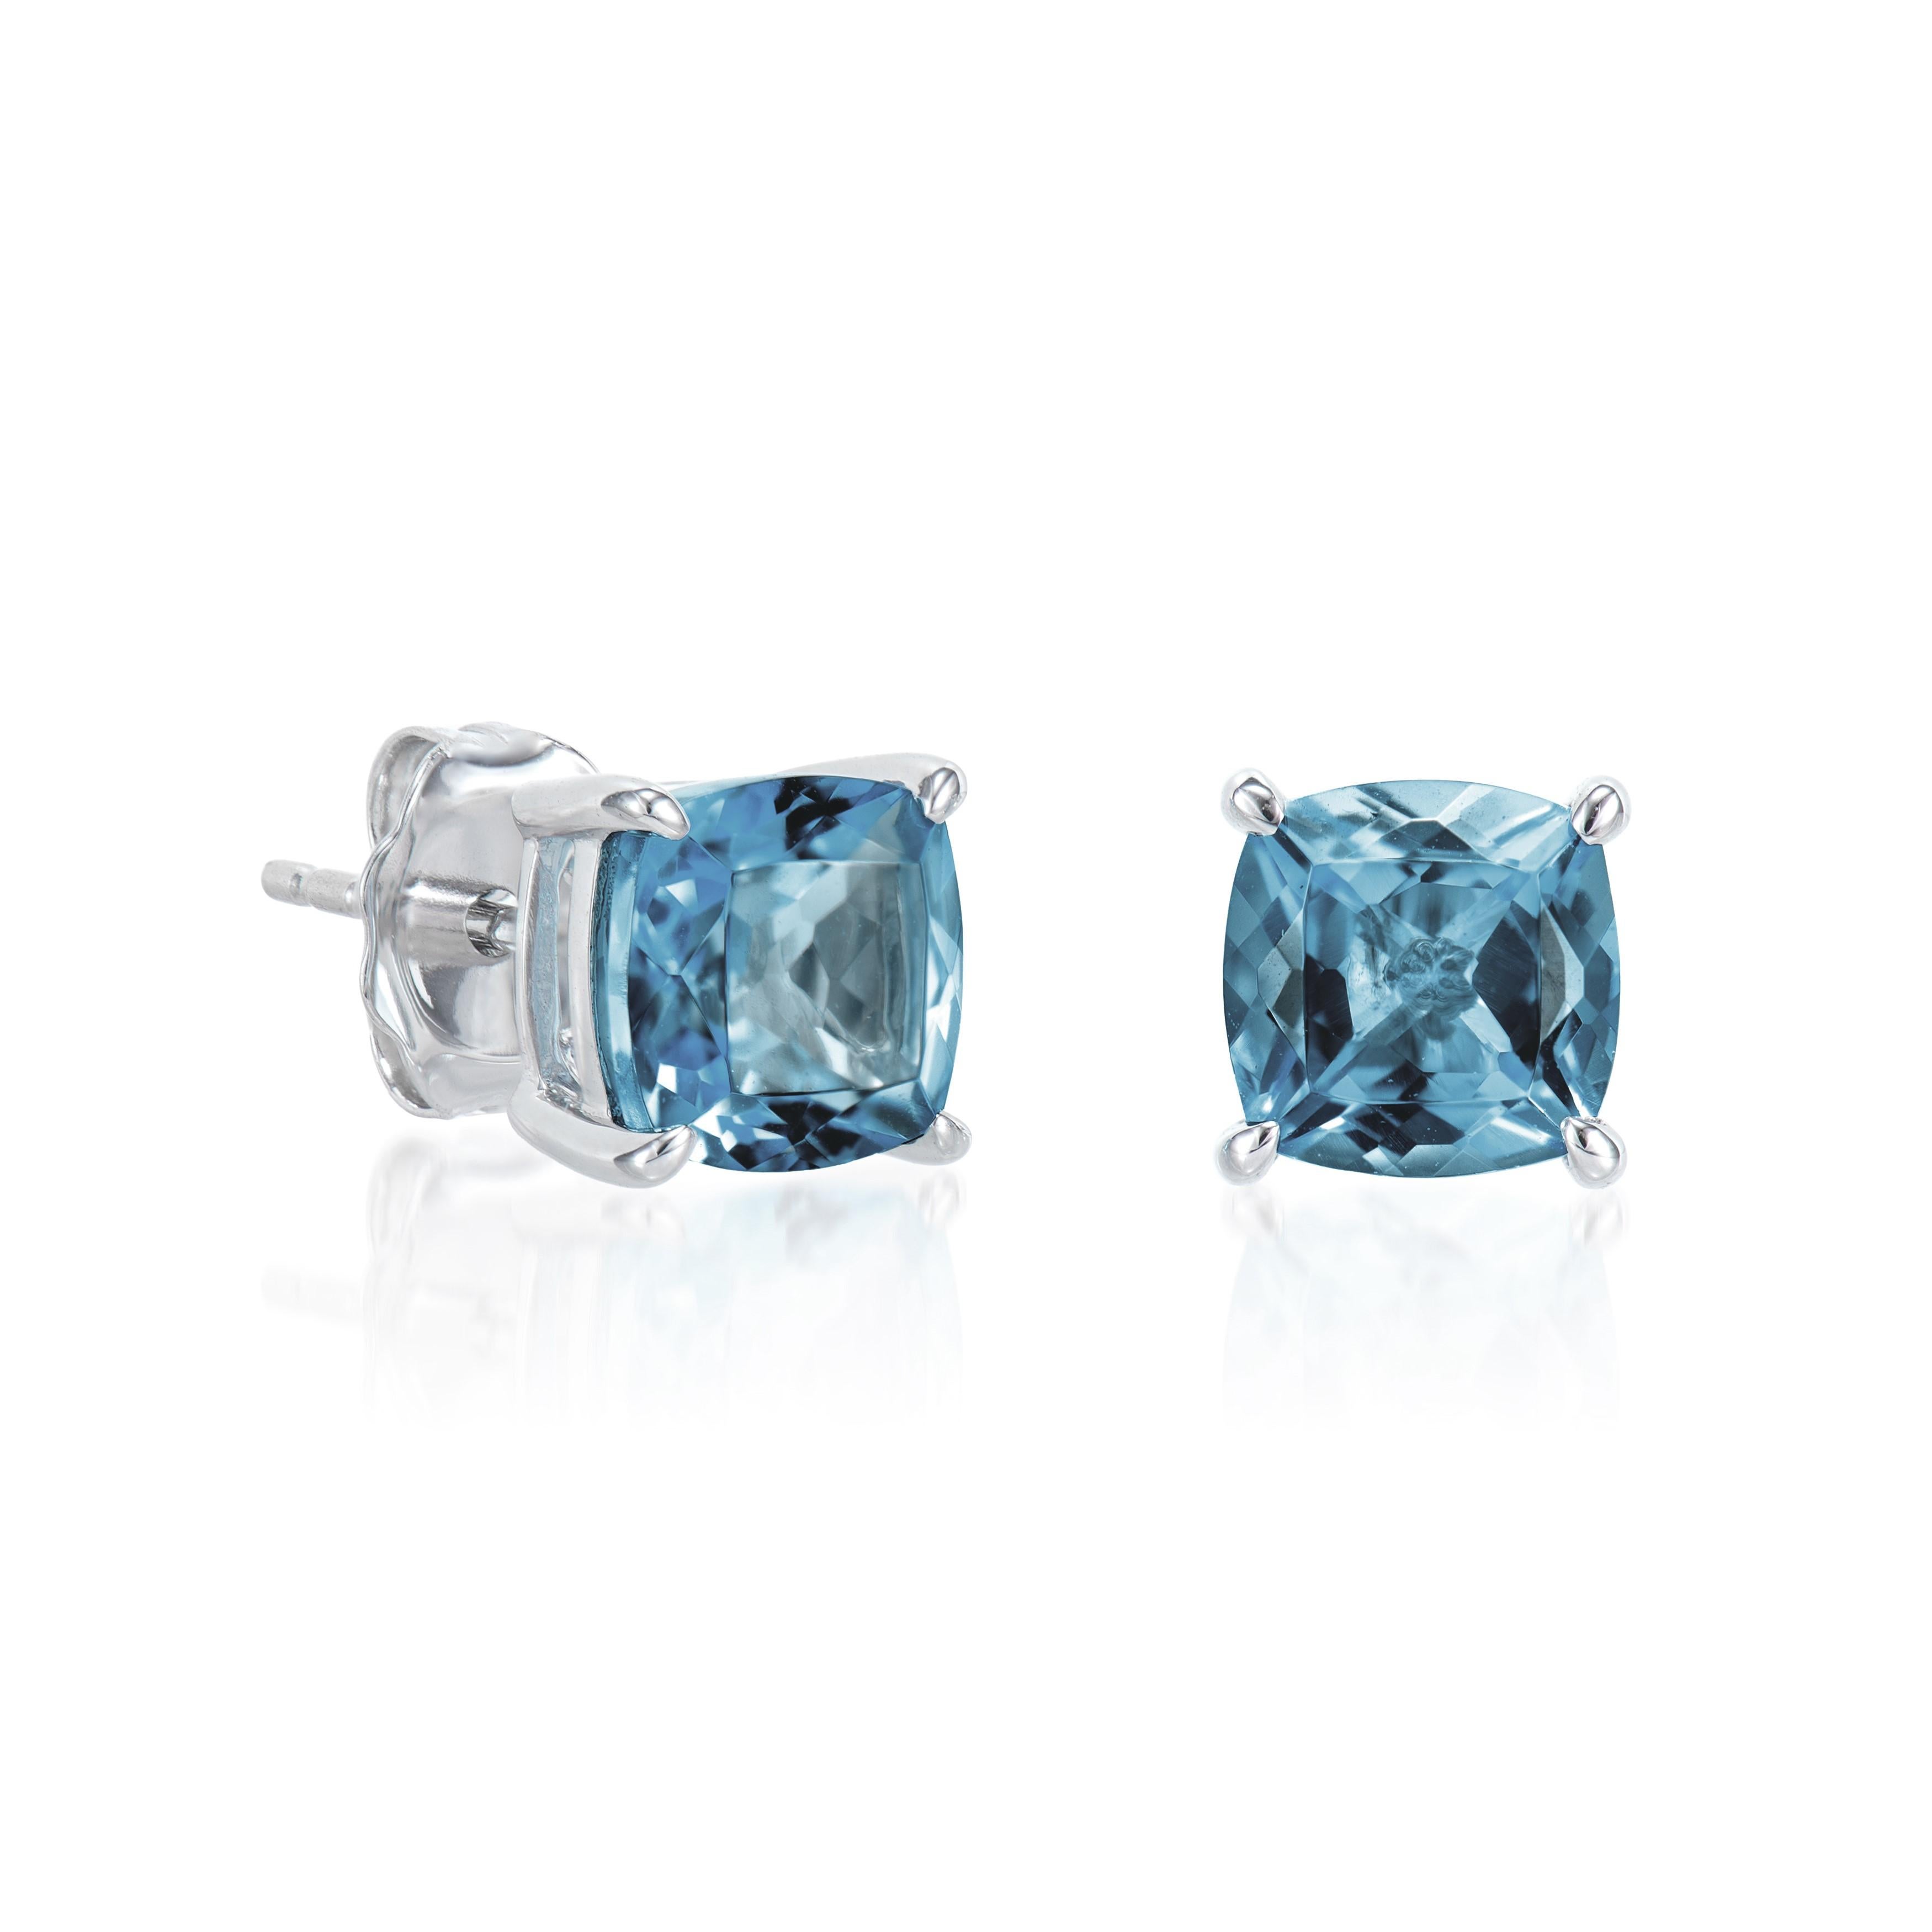 Presented A lovely collection of gems, including London blue topaz, Rhodolite, Peridot, Amethyst, Sky Blue Topaz and Swiss Blue Topaz is perfect for people who value quality and want to wear it to any occasion or celebration. The White gold London